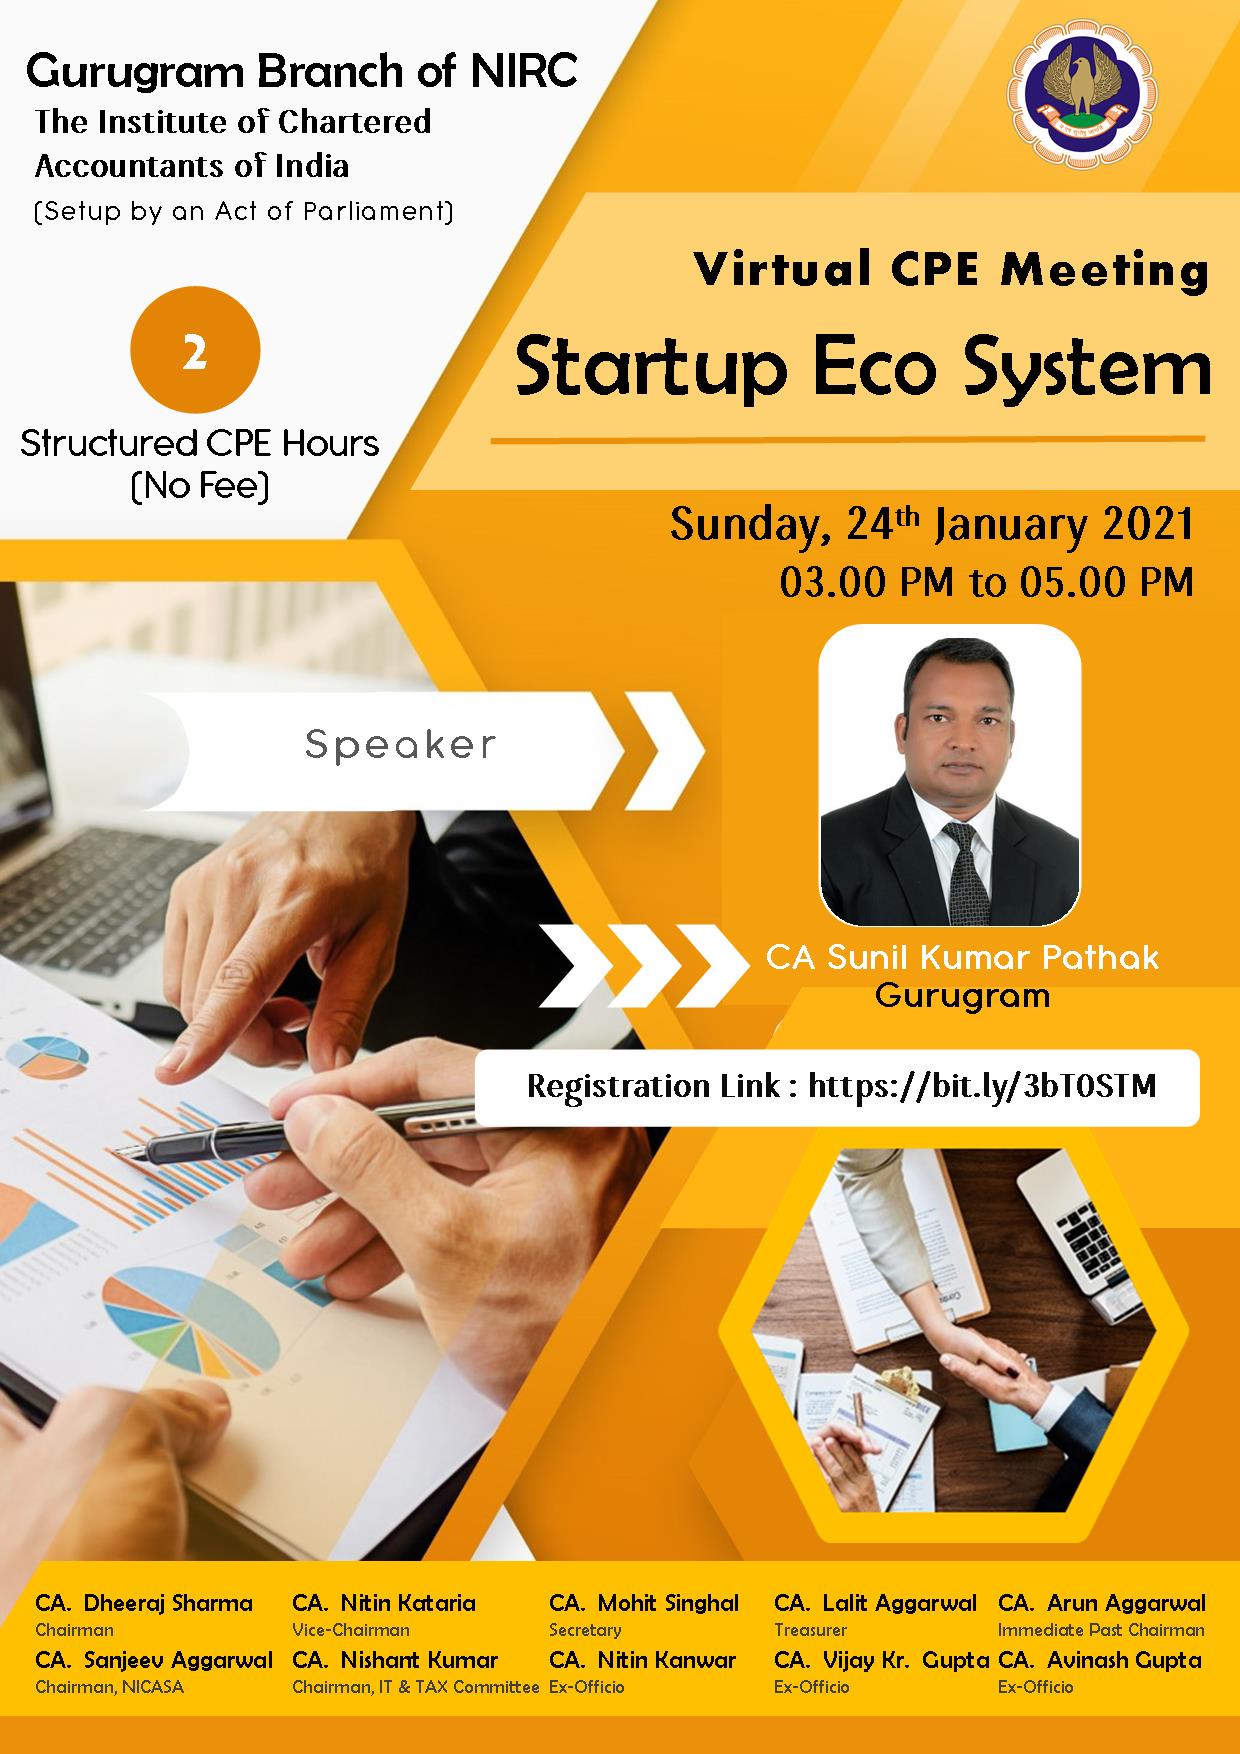 Virtual CPE Meeting on Startup Eco System